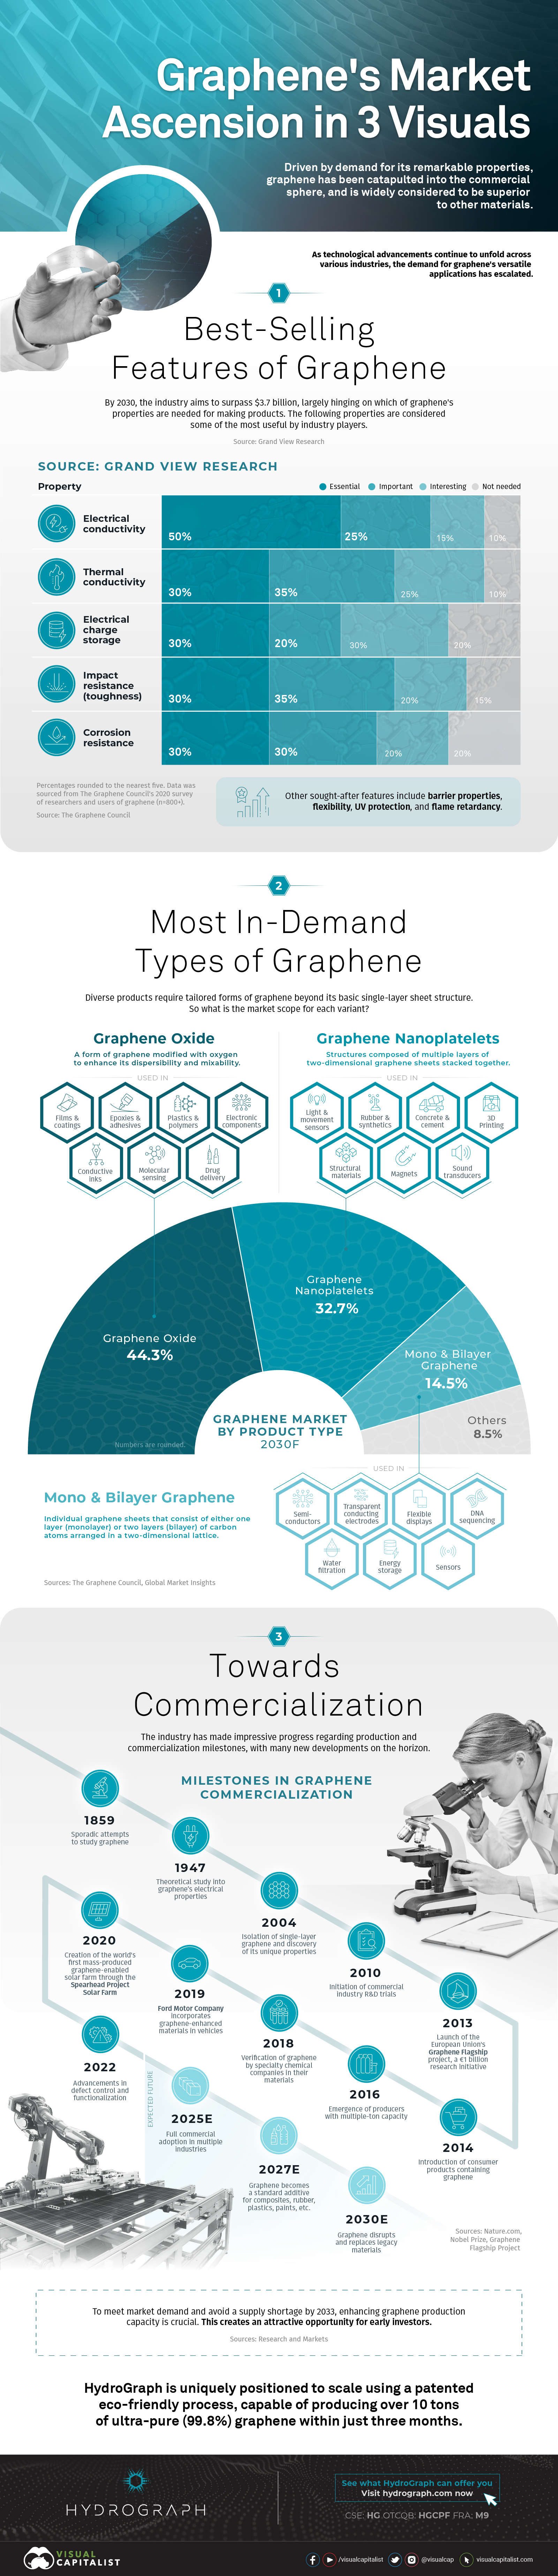 Graphene: market ascension in 3 charts